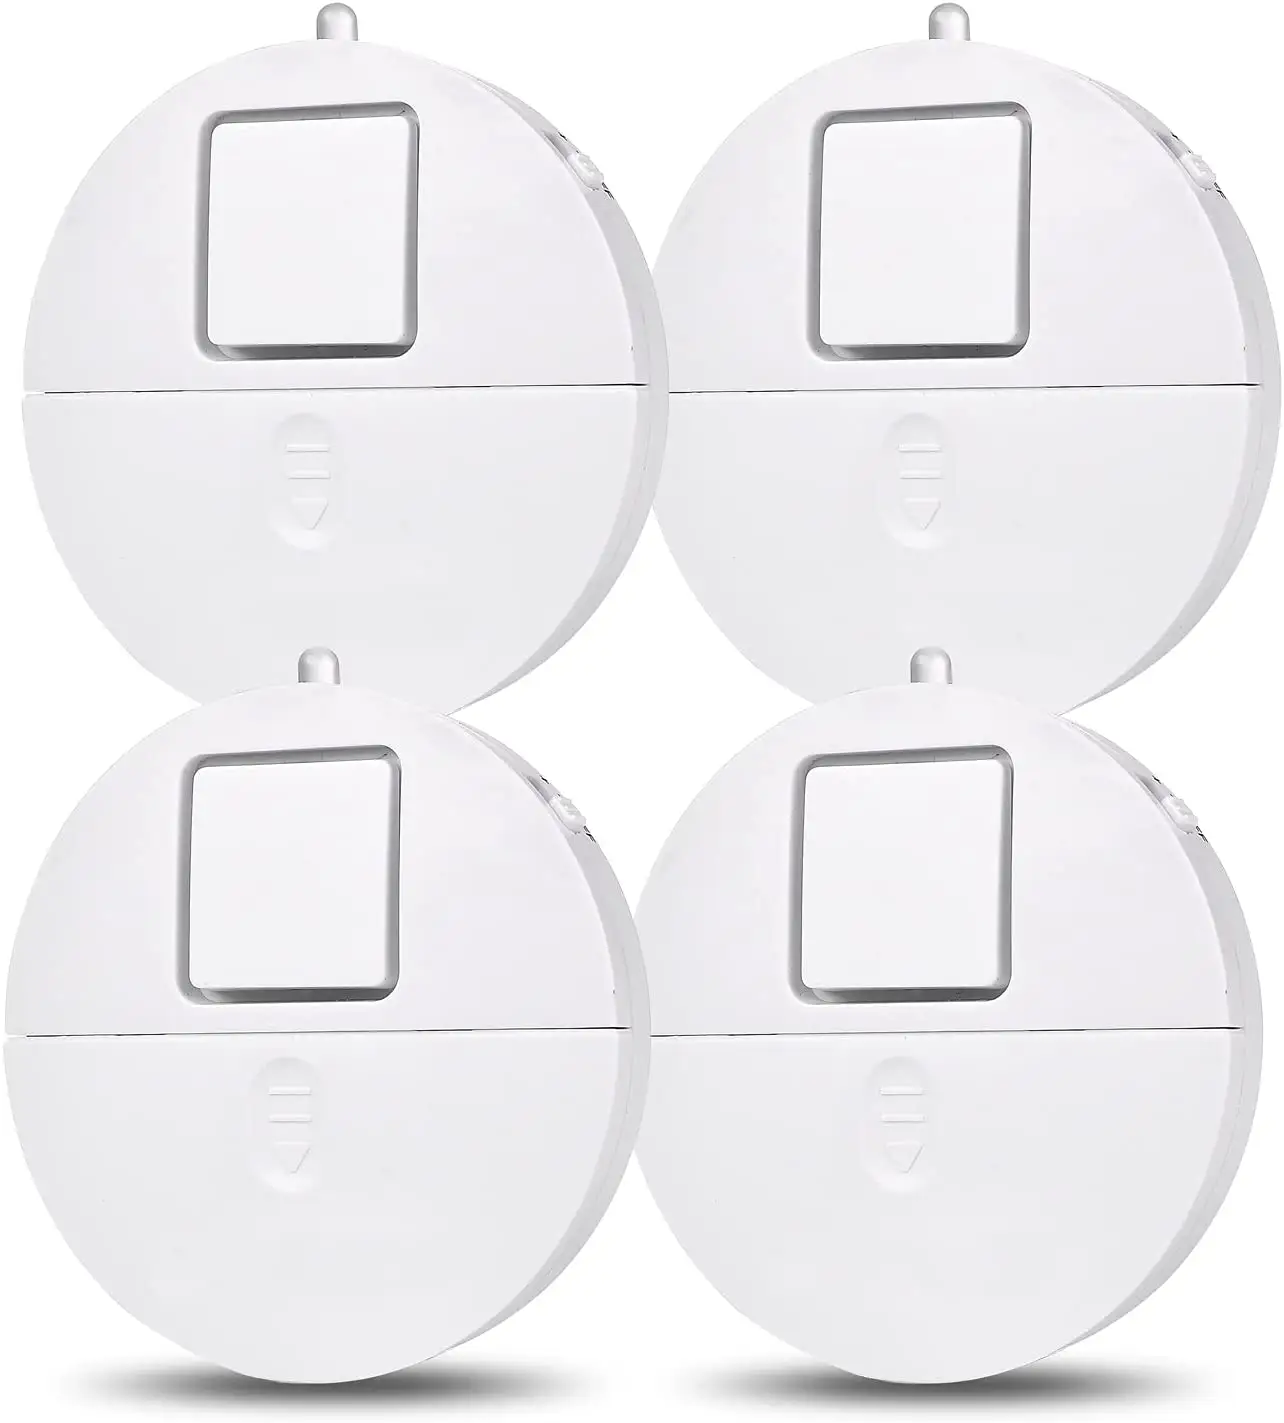 120db Wireless Home Intruder Alarm System Window Vibration Detector GSM IP Network Battery Powered Home Security Door Protection